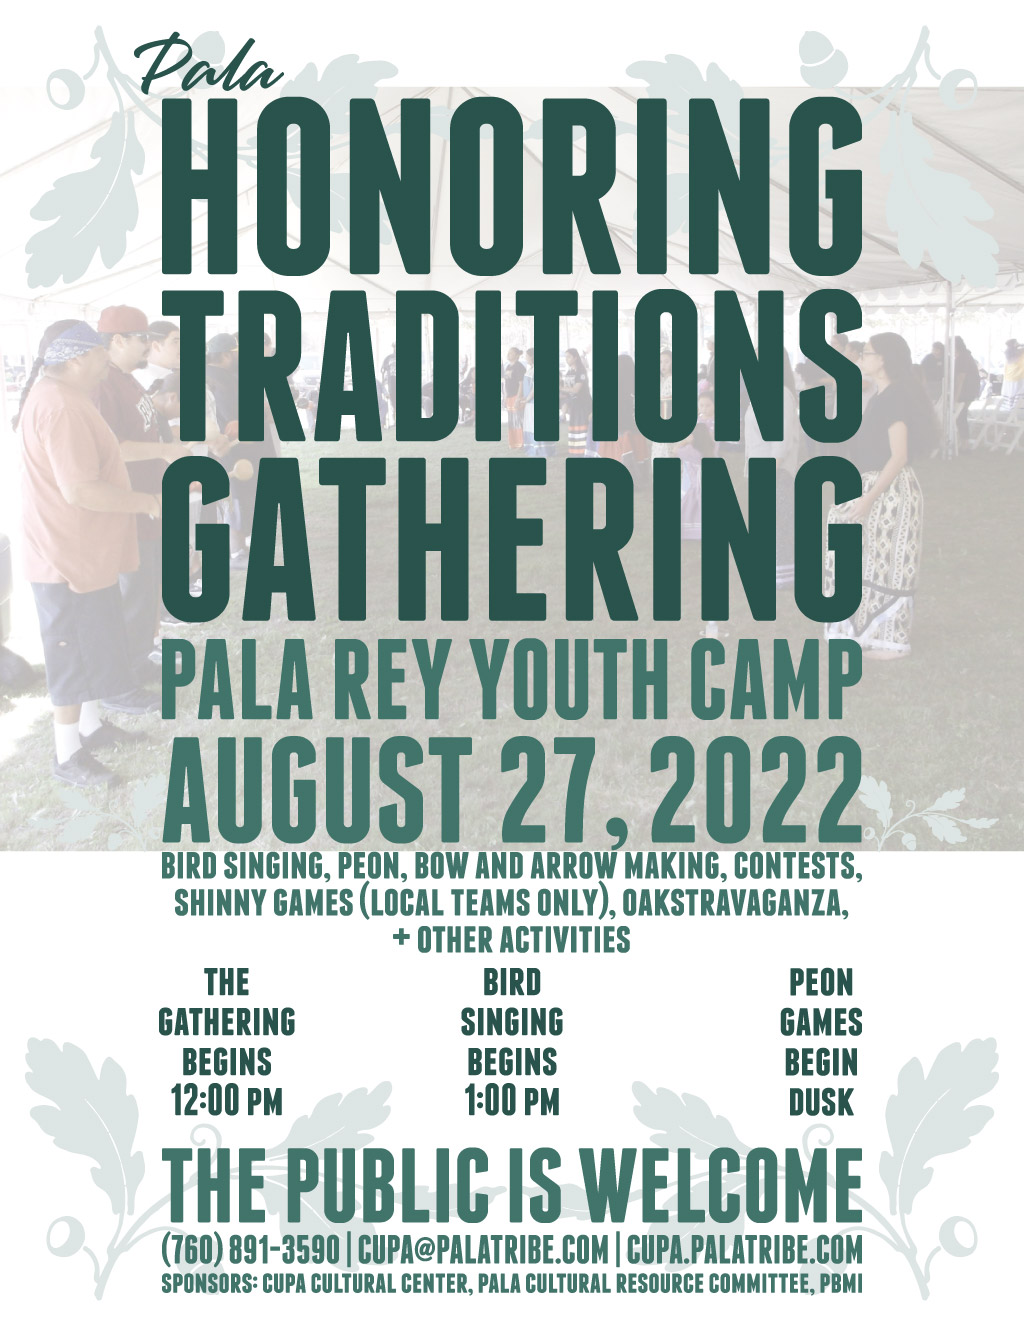 Pala Band California Cupa Cultural Center Event Honoring Traditions Gathering